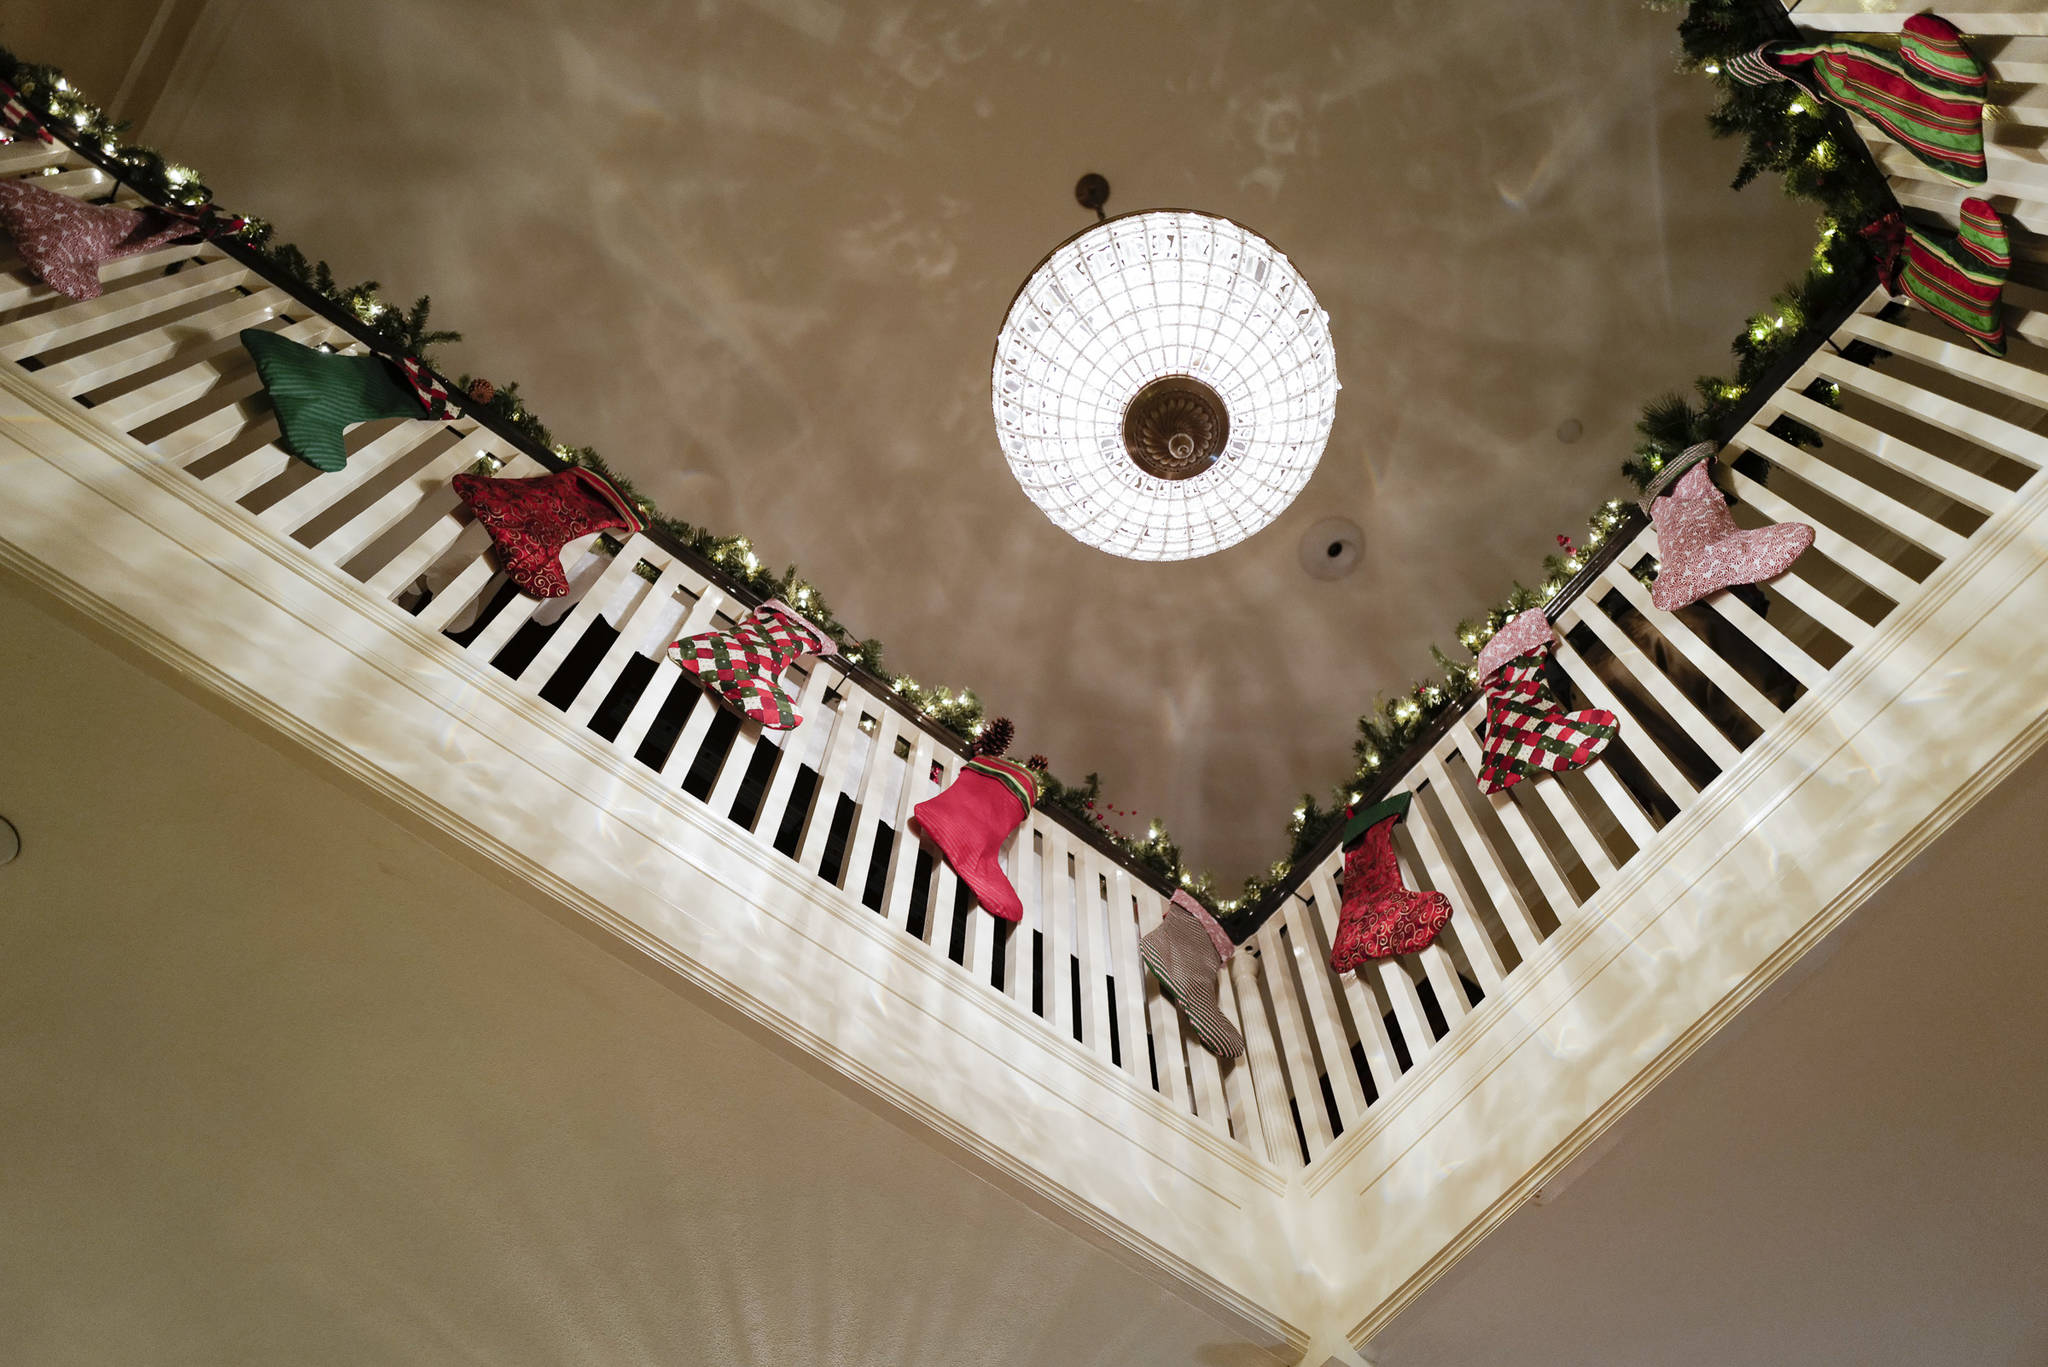 Stockings hang decorate the second floor balcony during the Governor’s Open House on Tuesday, Dec. 10, 2019. (Michael Penn | Juneau Empire)